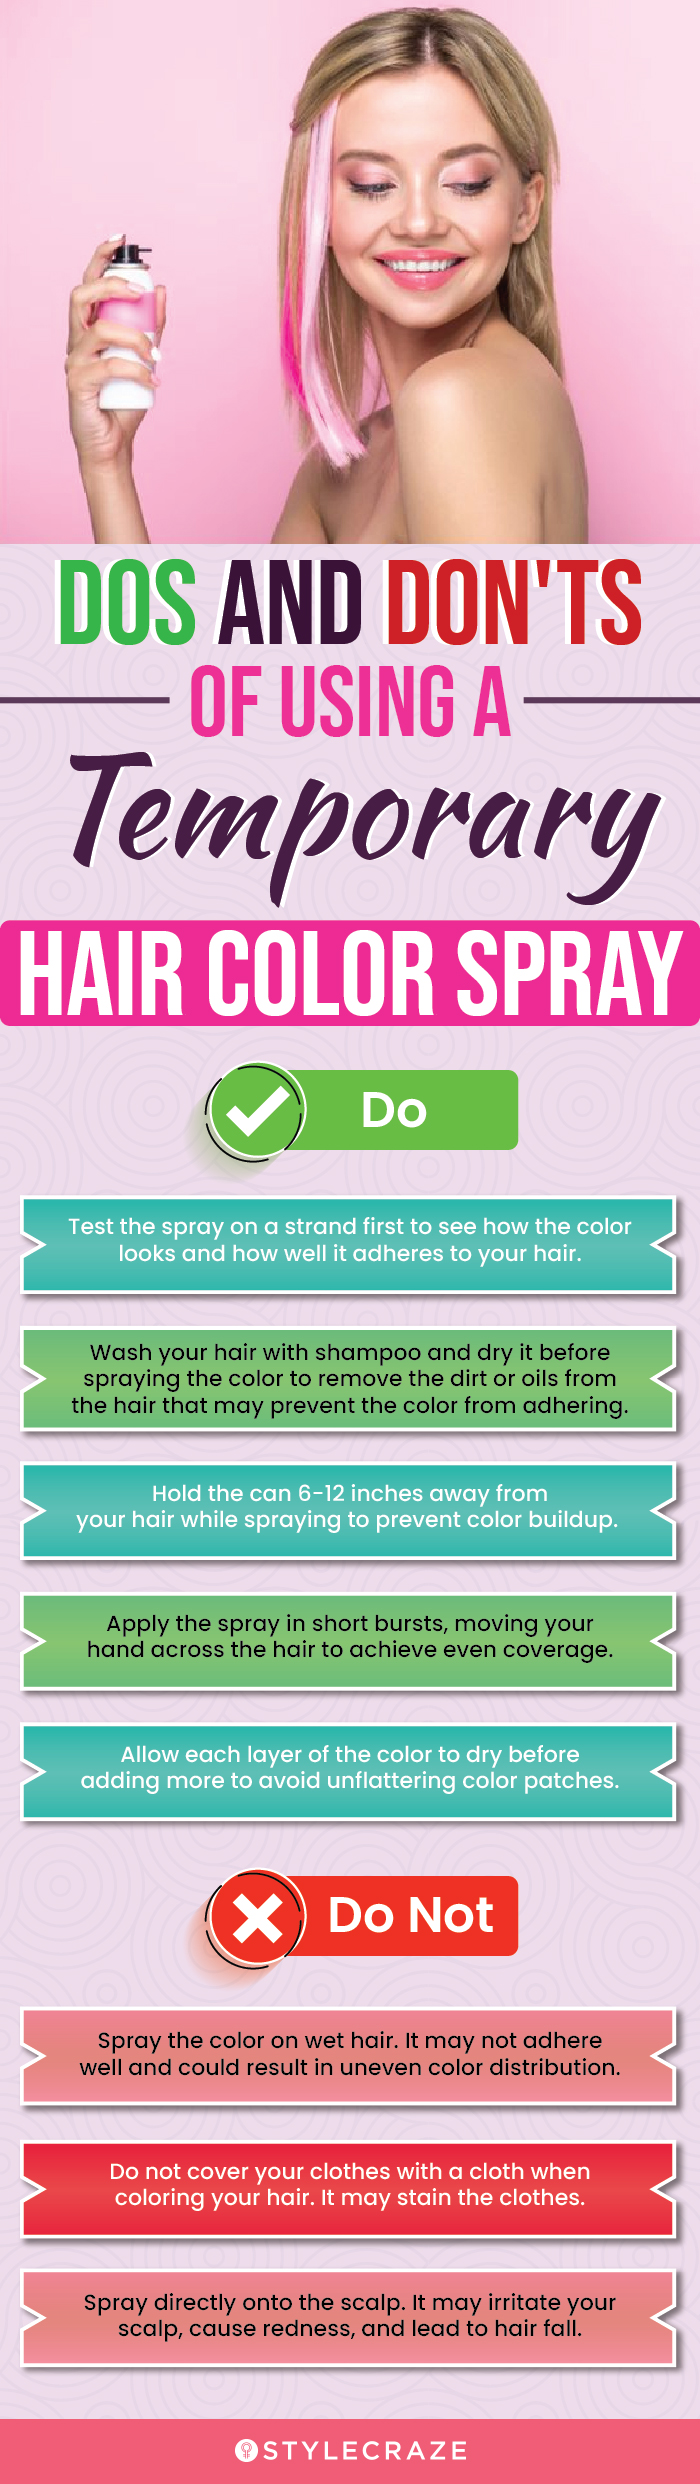 Dos and Don'ts Of Using A Temporary Hair Color Spray (infographic)